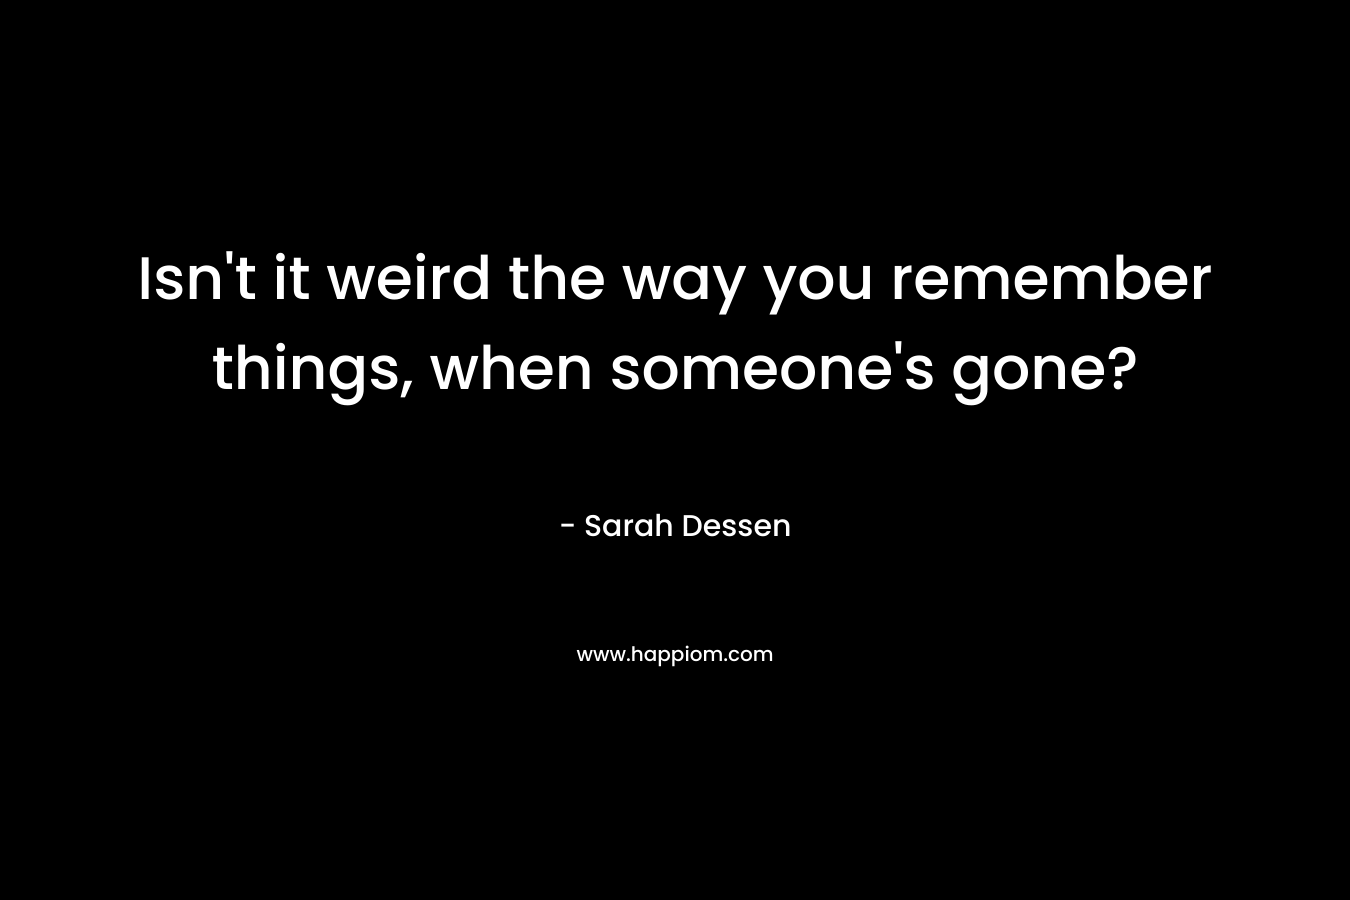 Isn’t it weird the way you remember things, when someone’s gone? – Sarah Dessen